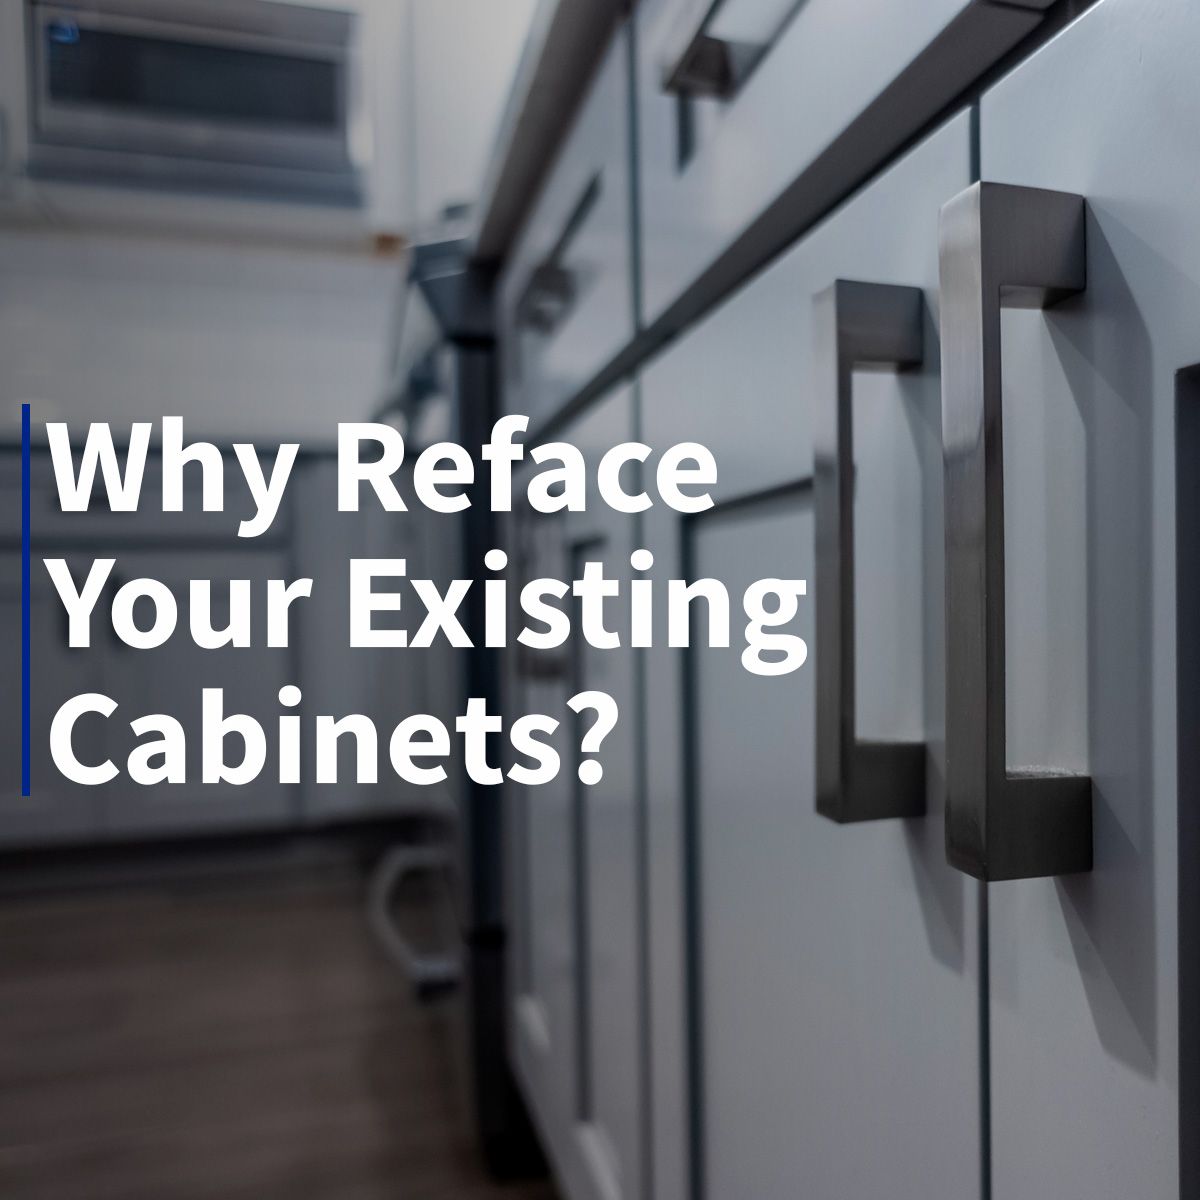 Why Reface Your Existing Cabinets?